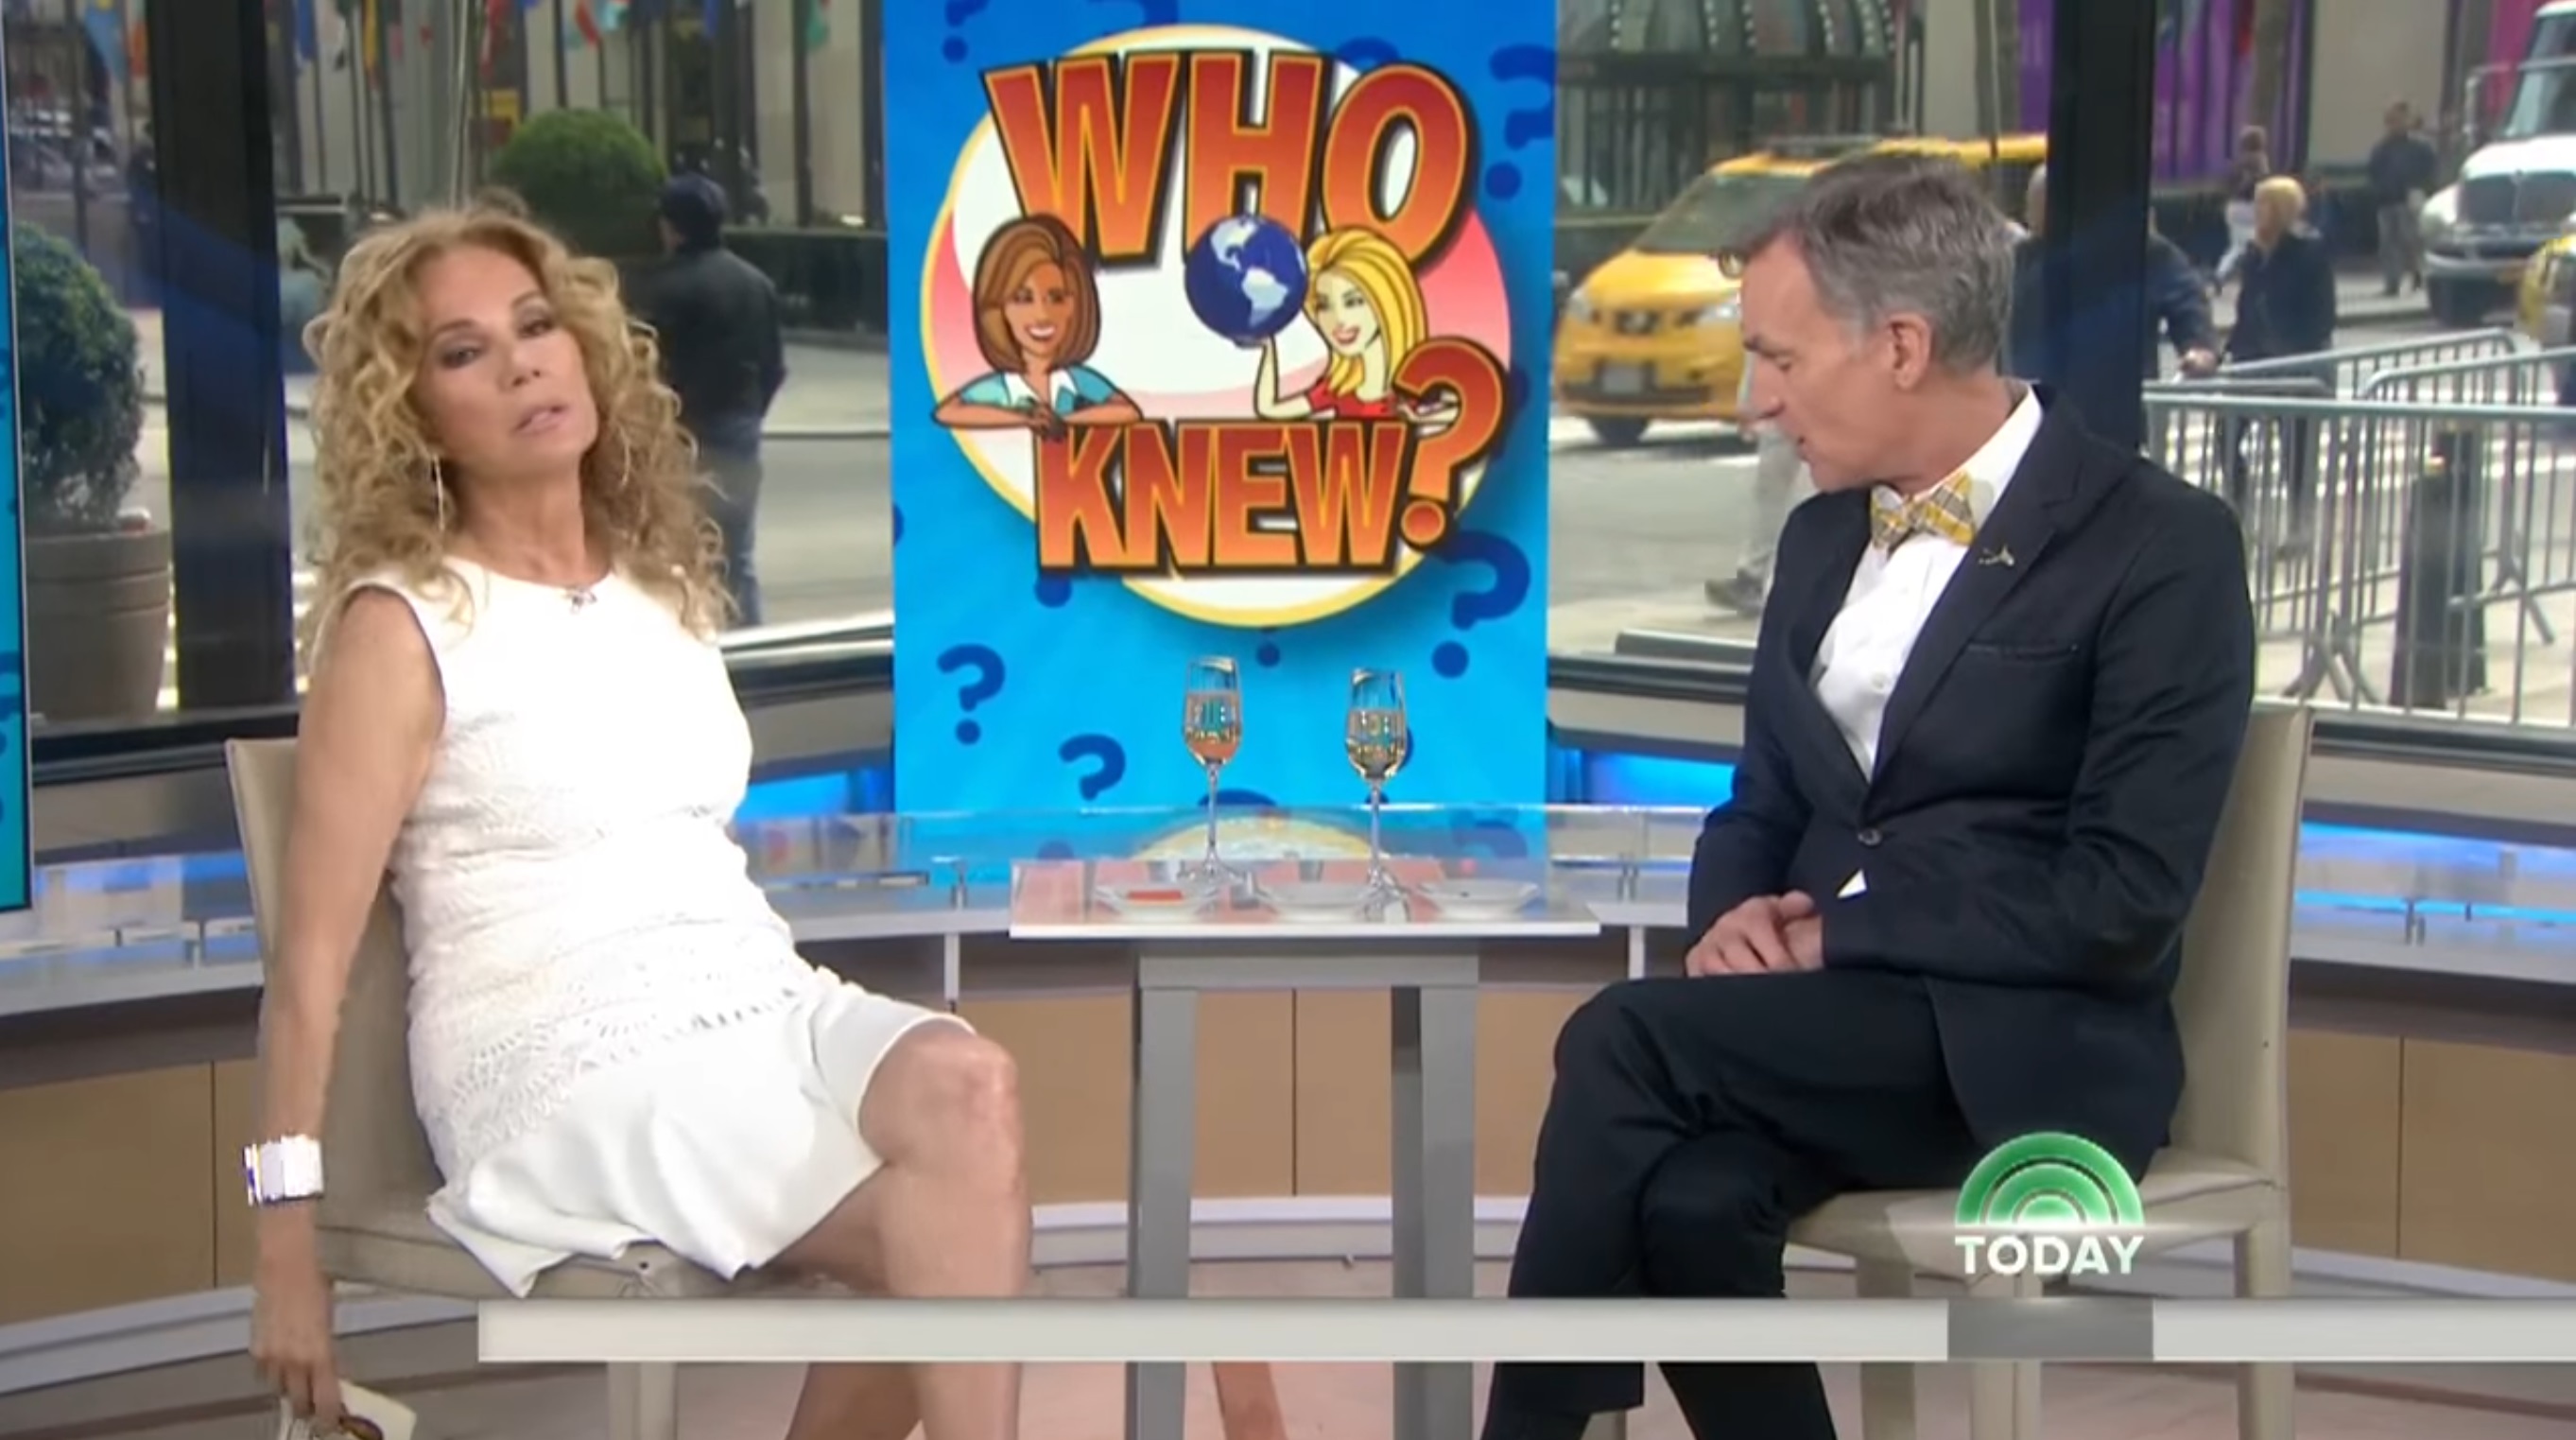 Rude Today Show Host Can’t Stand Her Guest, Guest Responds